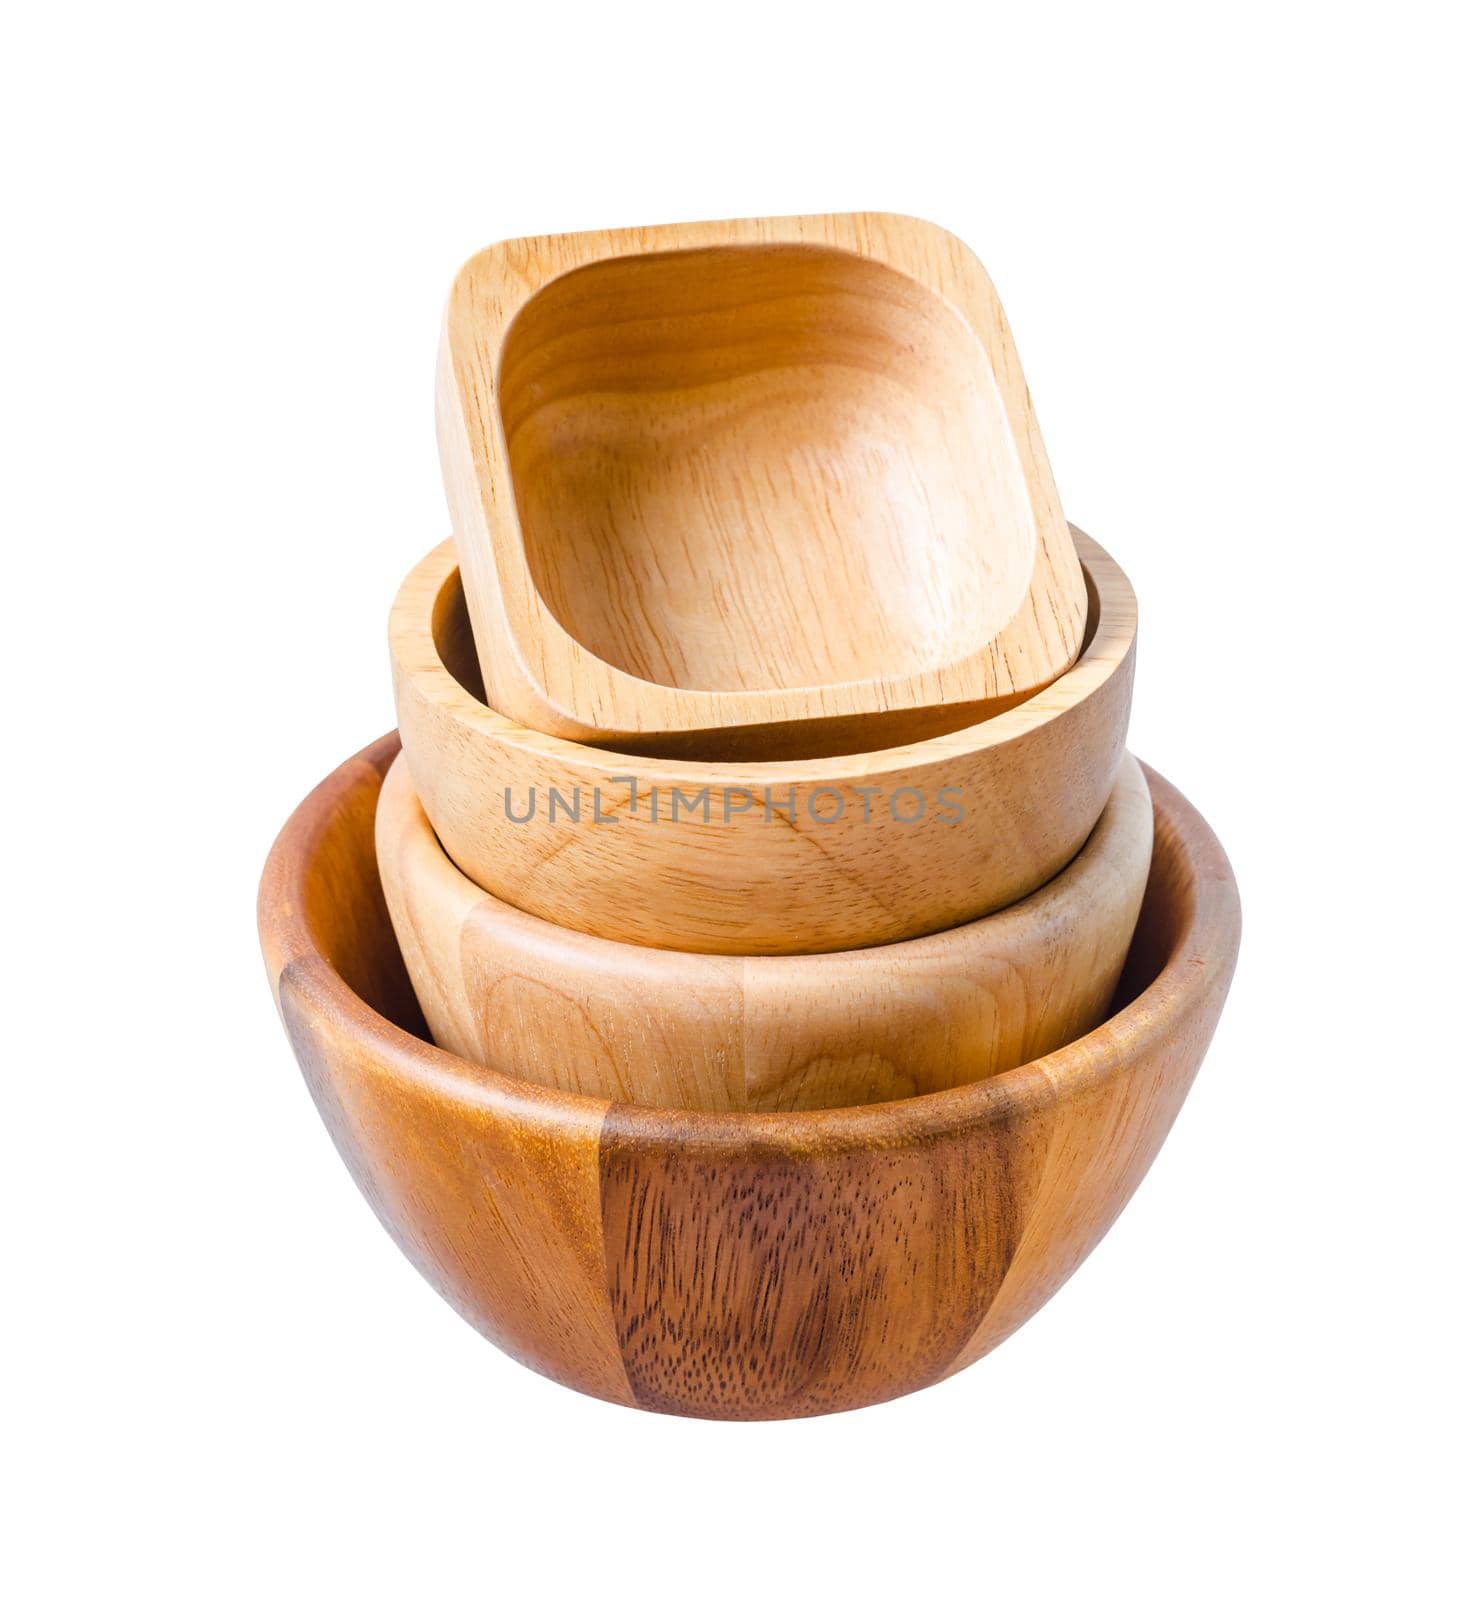 Empty wooden bowl overlap isolated on white background, Save clipping path.